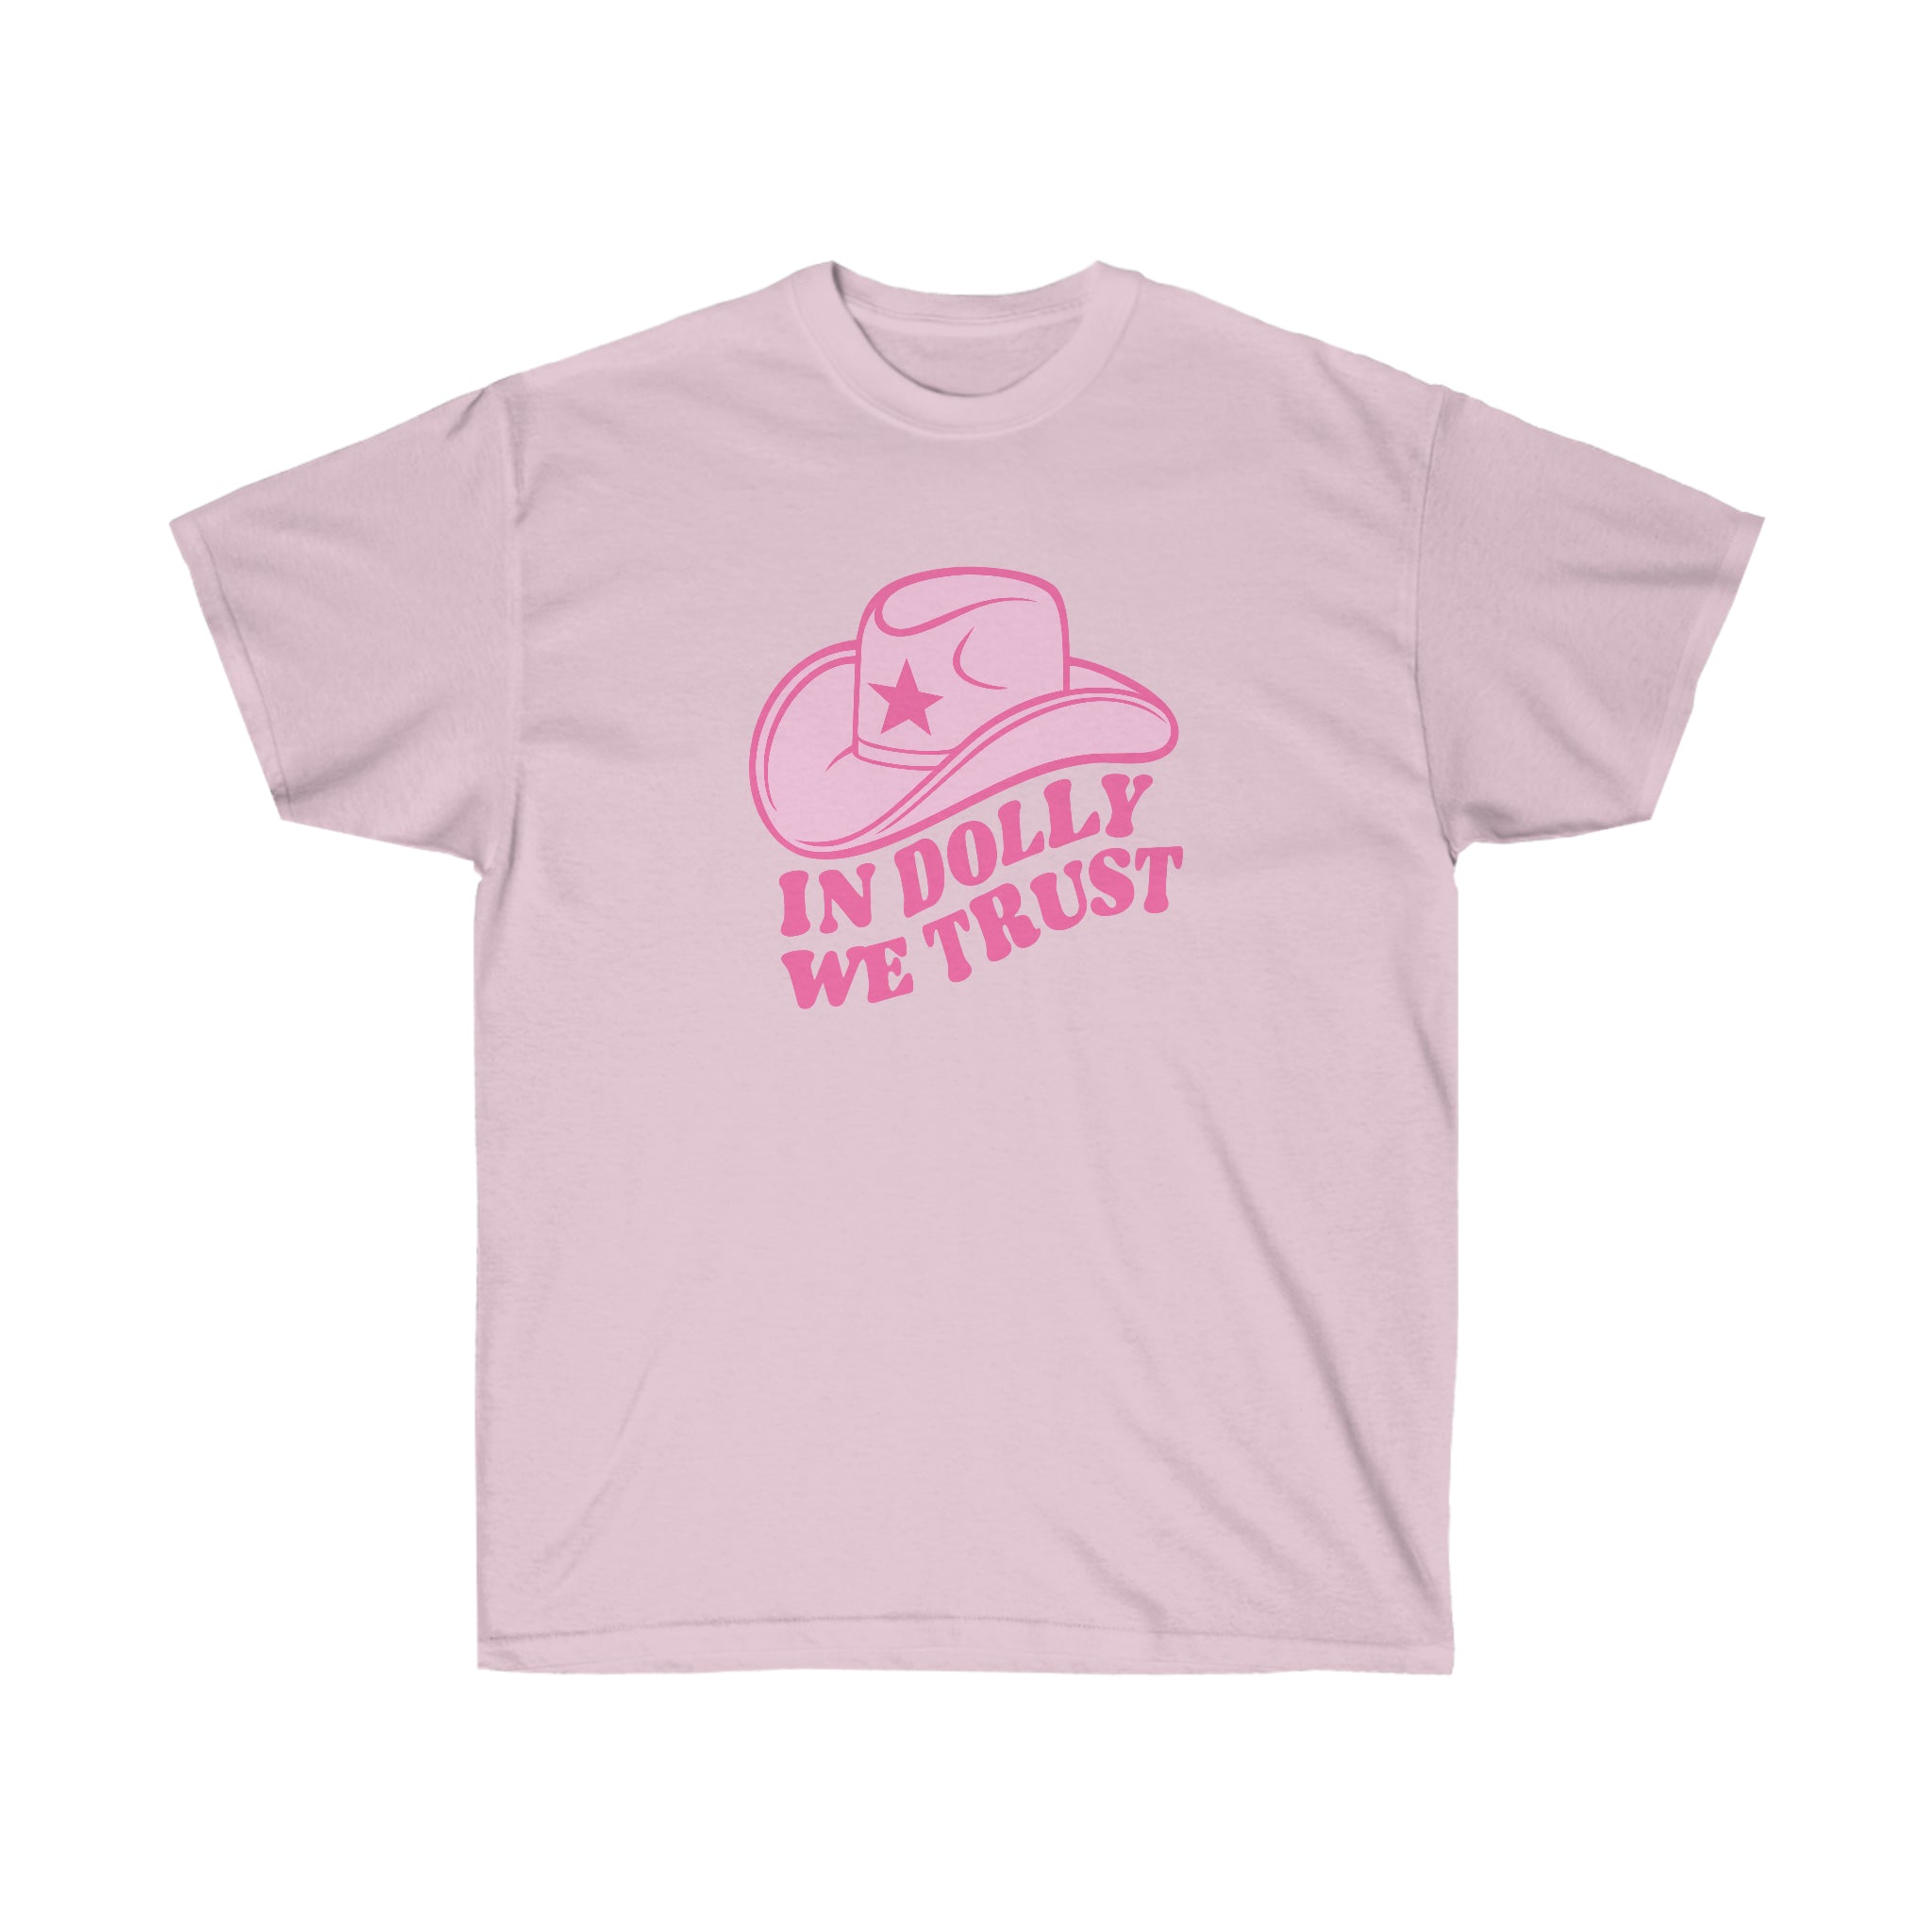 In Dolly We Trust | Tee